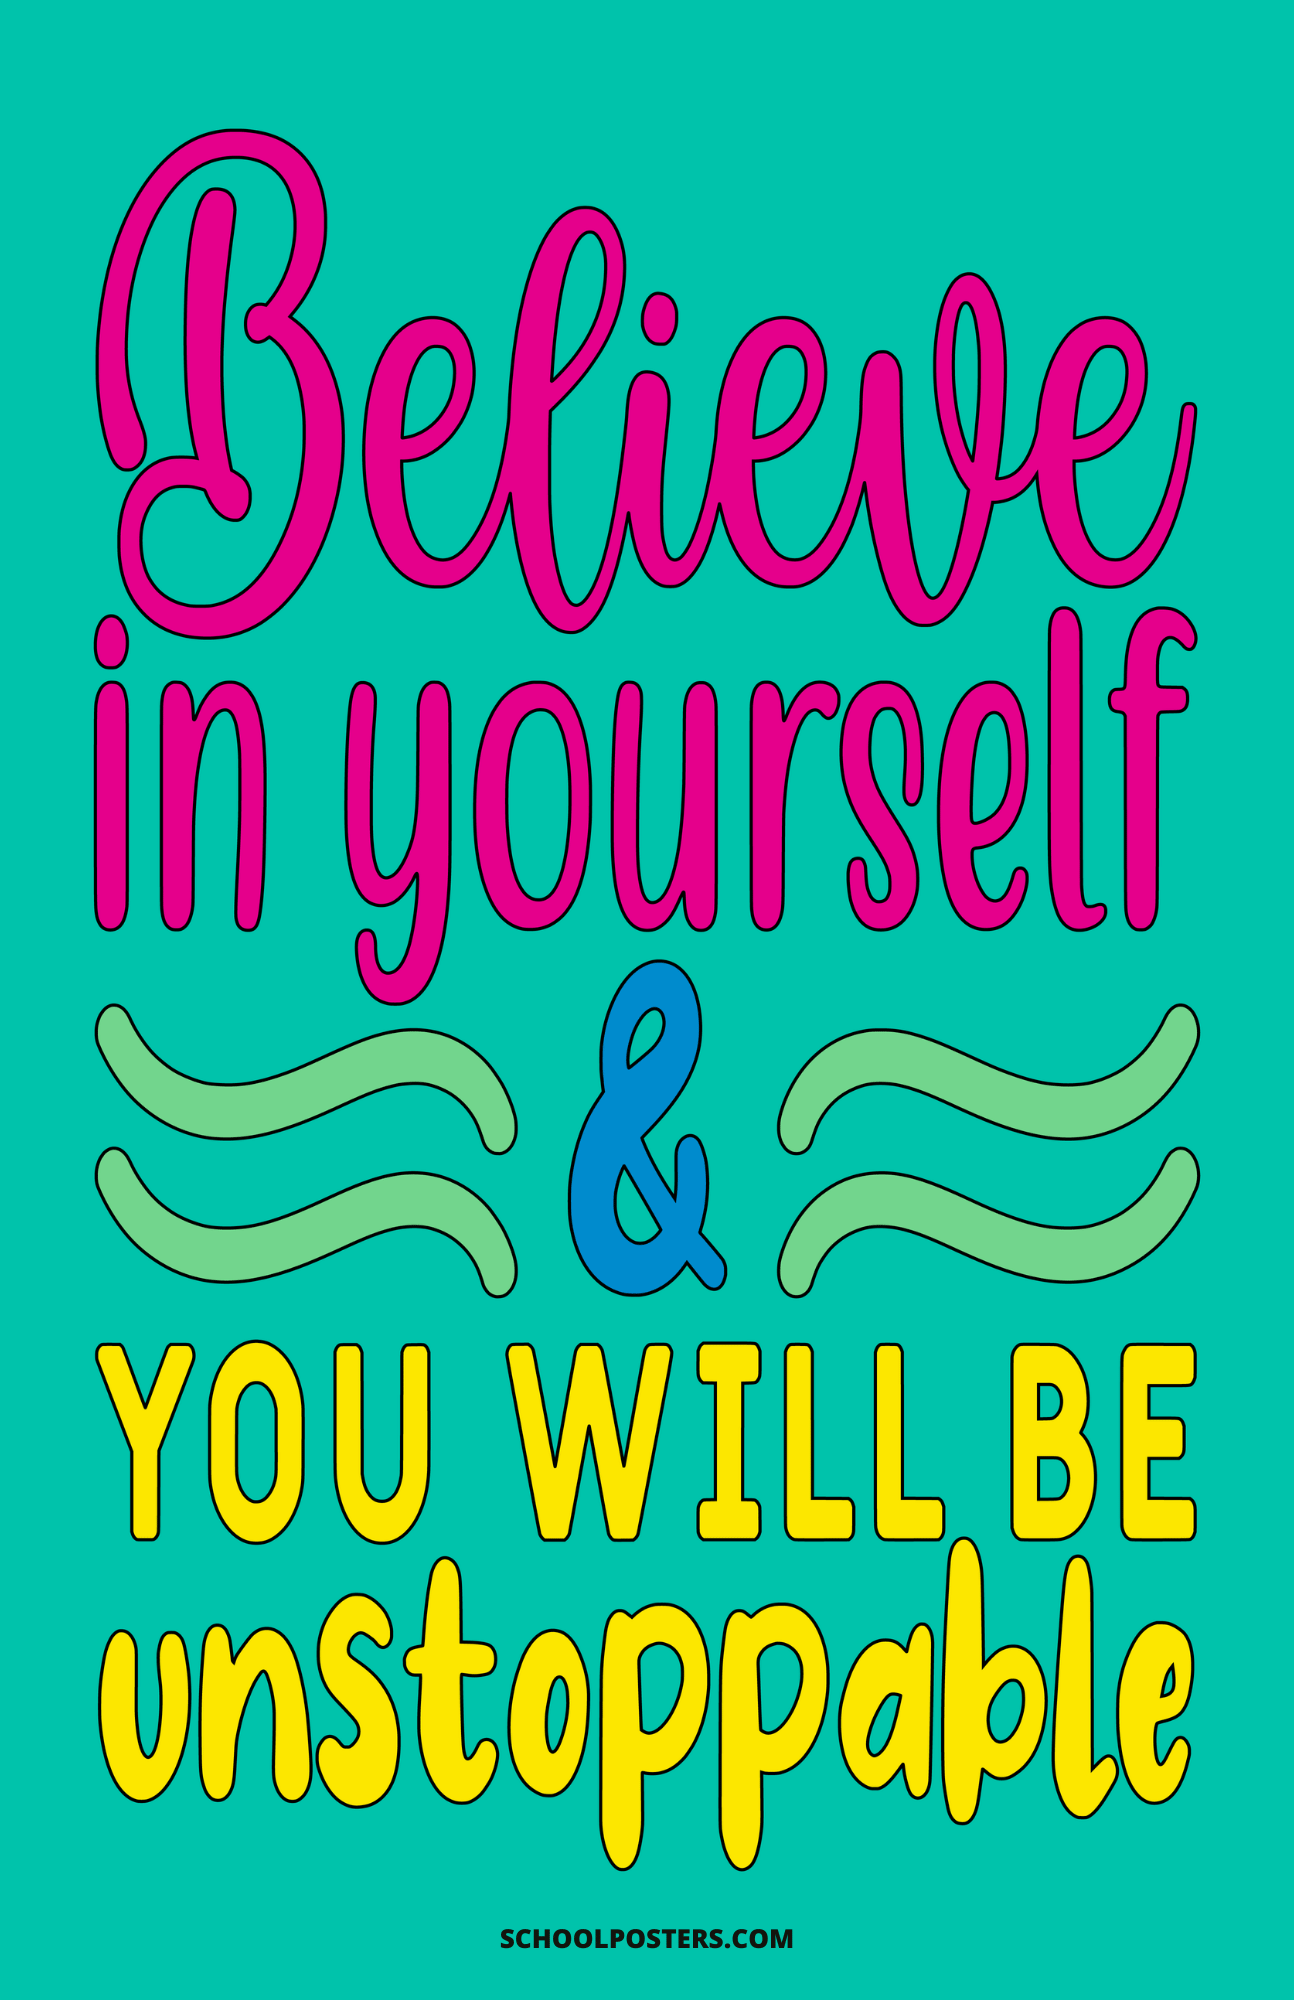 Believe In Yourself Poster